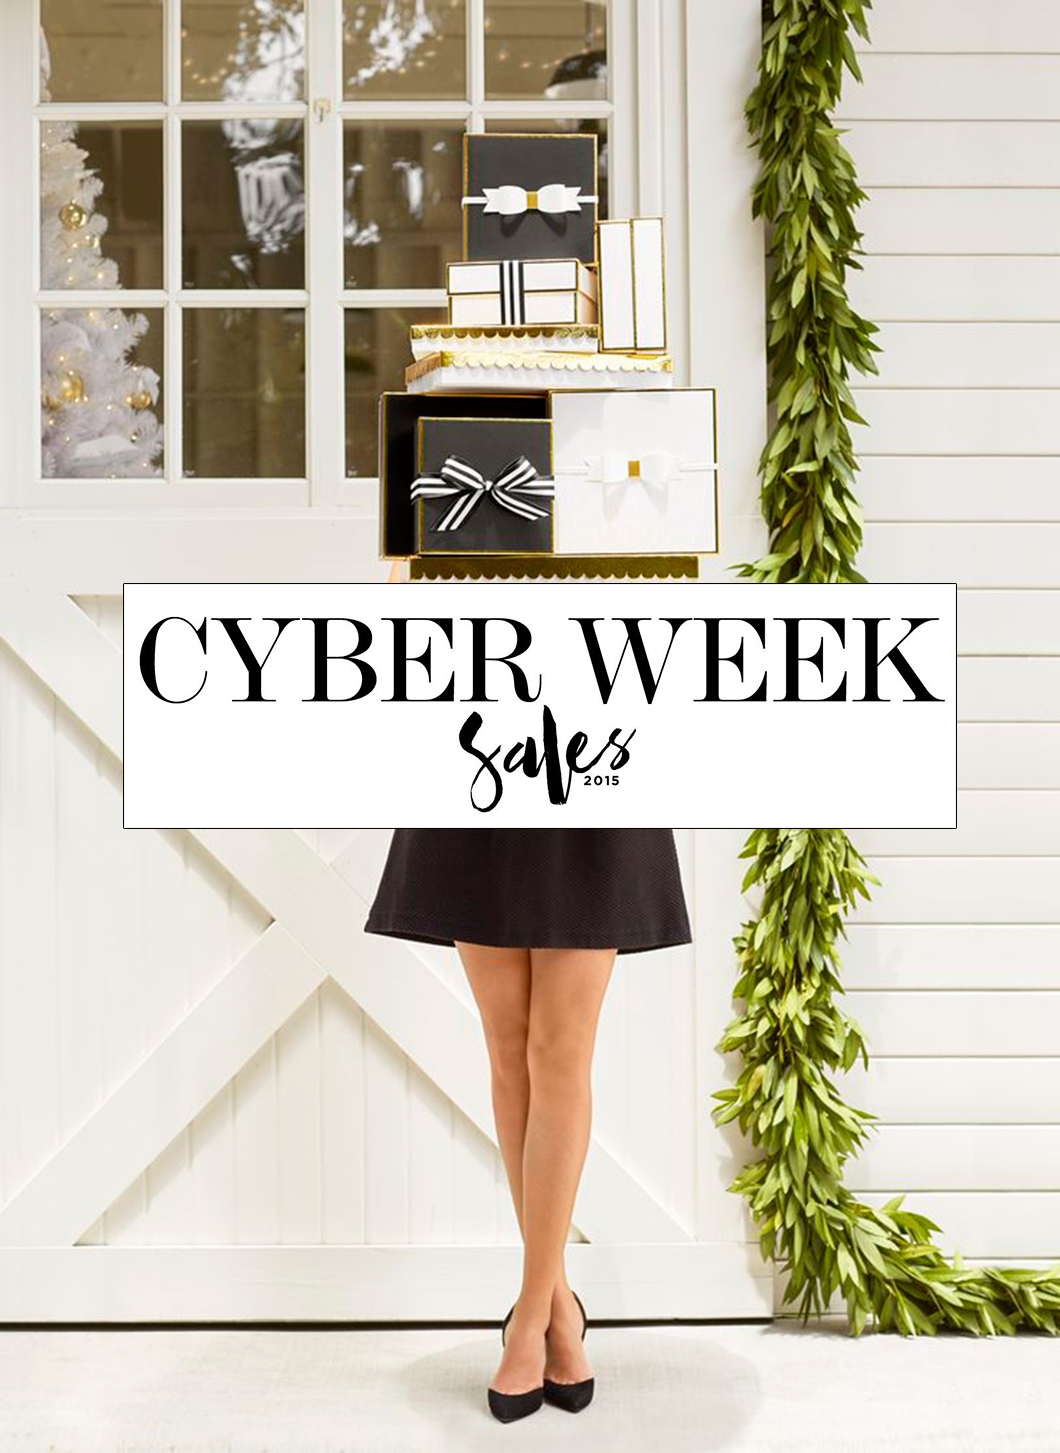 The Best Sales for Cyber Week!